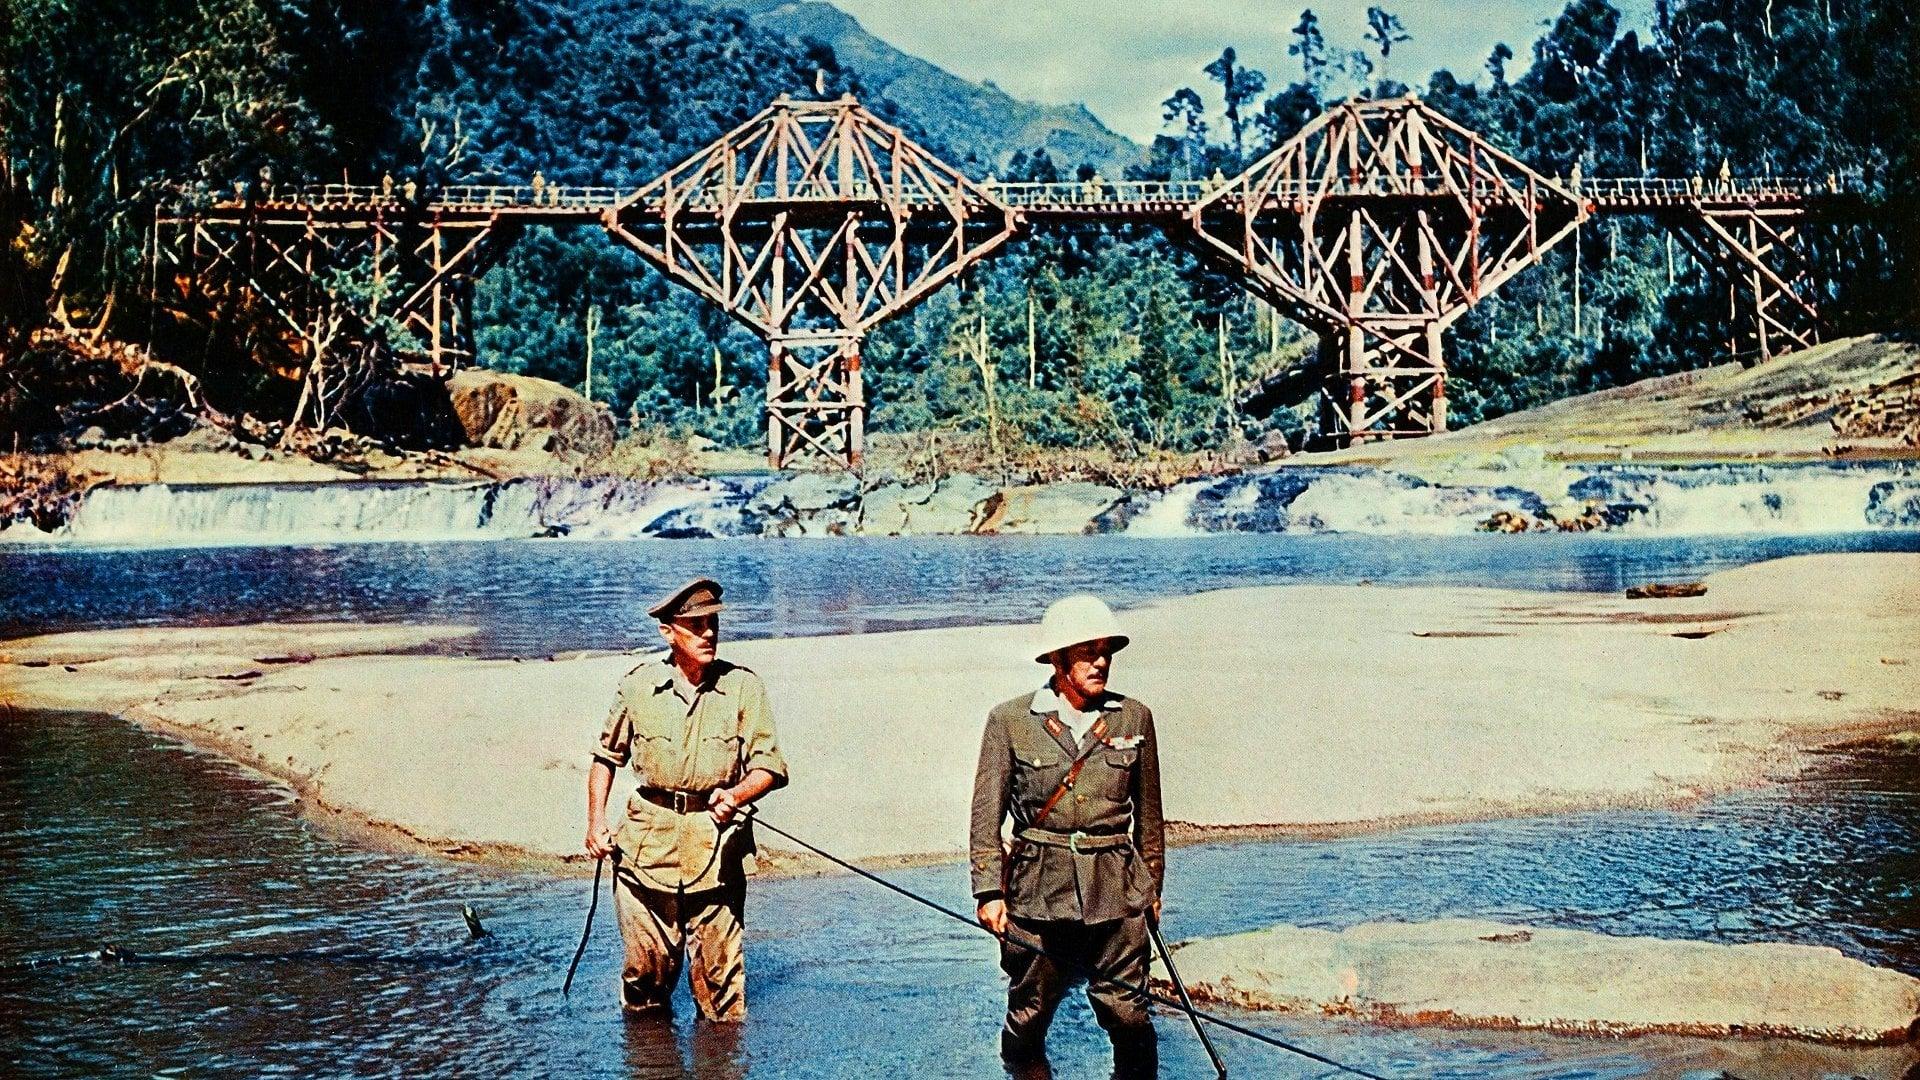 Backdrop Image for The Bridge on the River Kwai